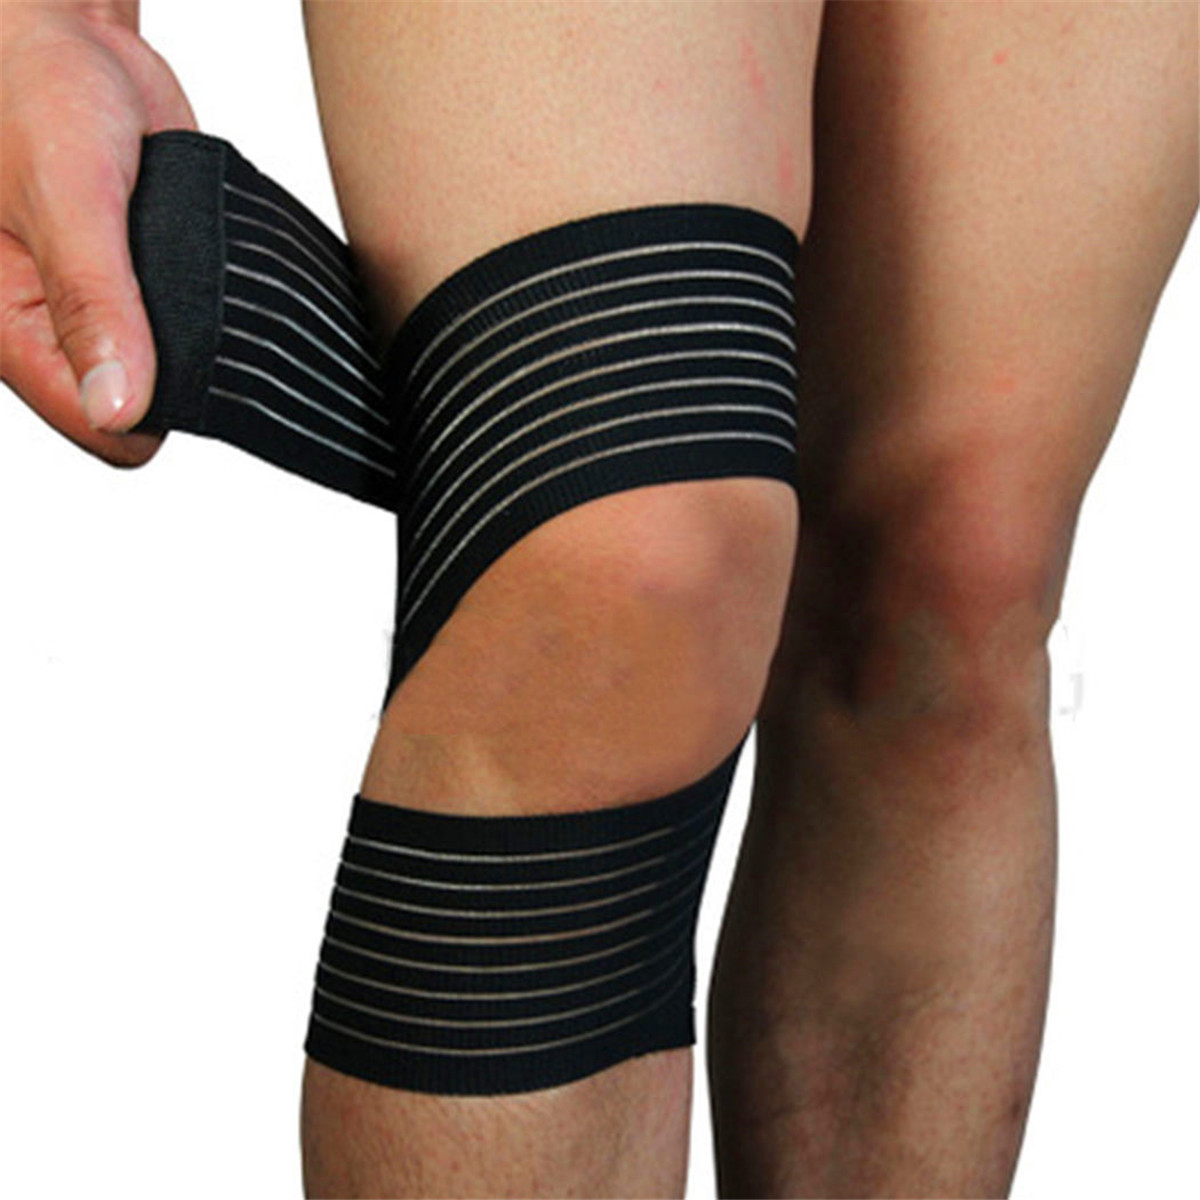 Elastic-Sports-Bandage-Knee-Pad-Support-Wrap-Knee-Band-Brace-Elbow-Calf-Arm-Support-950117-4